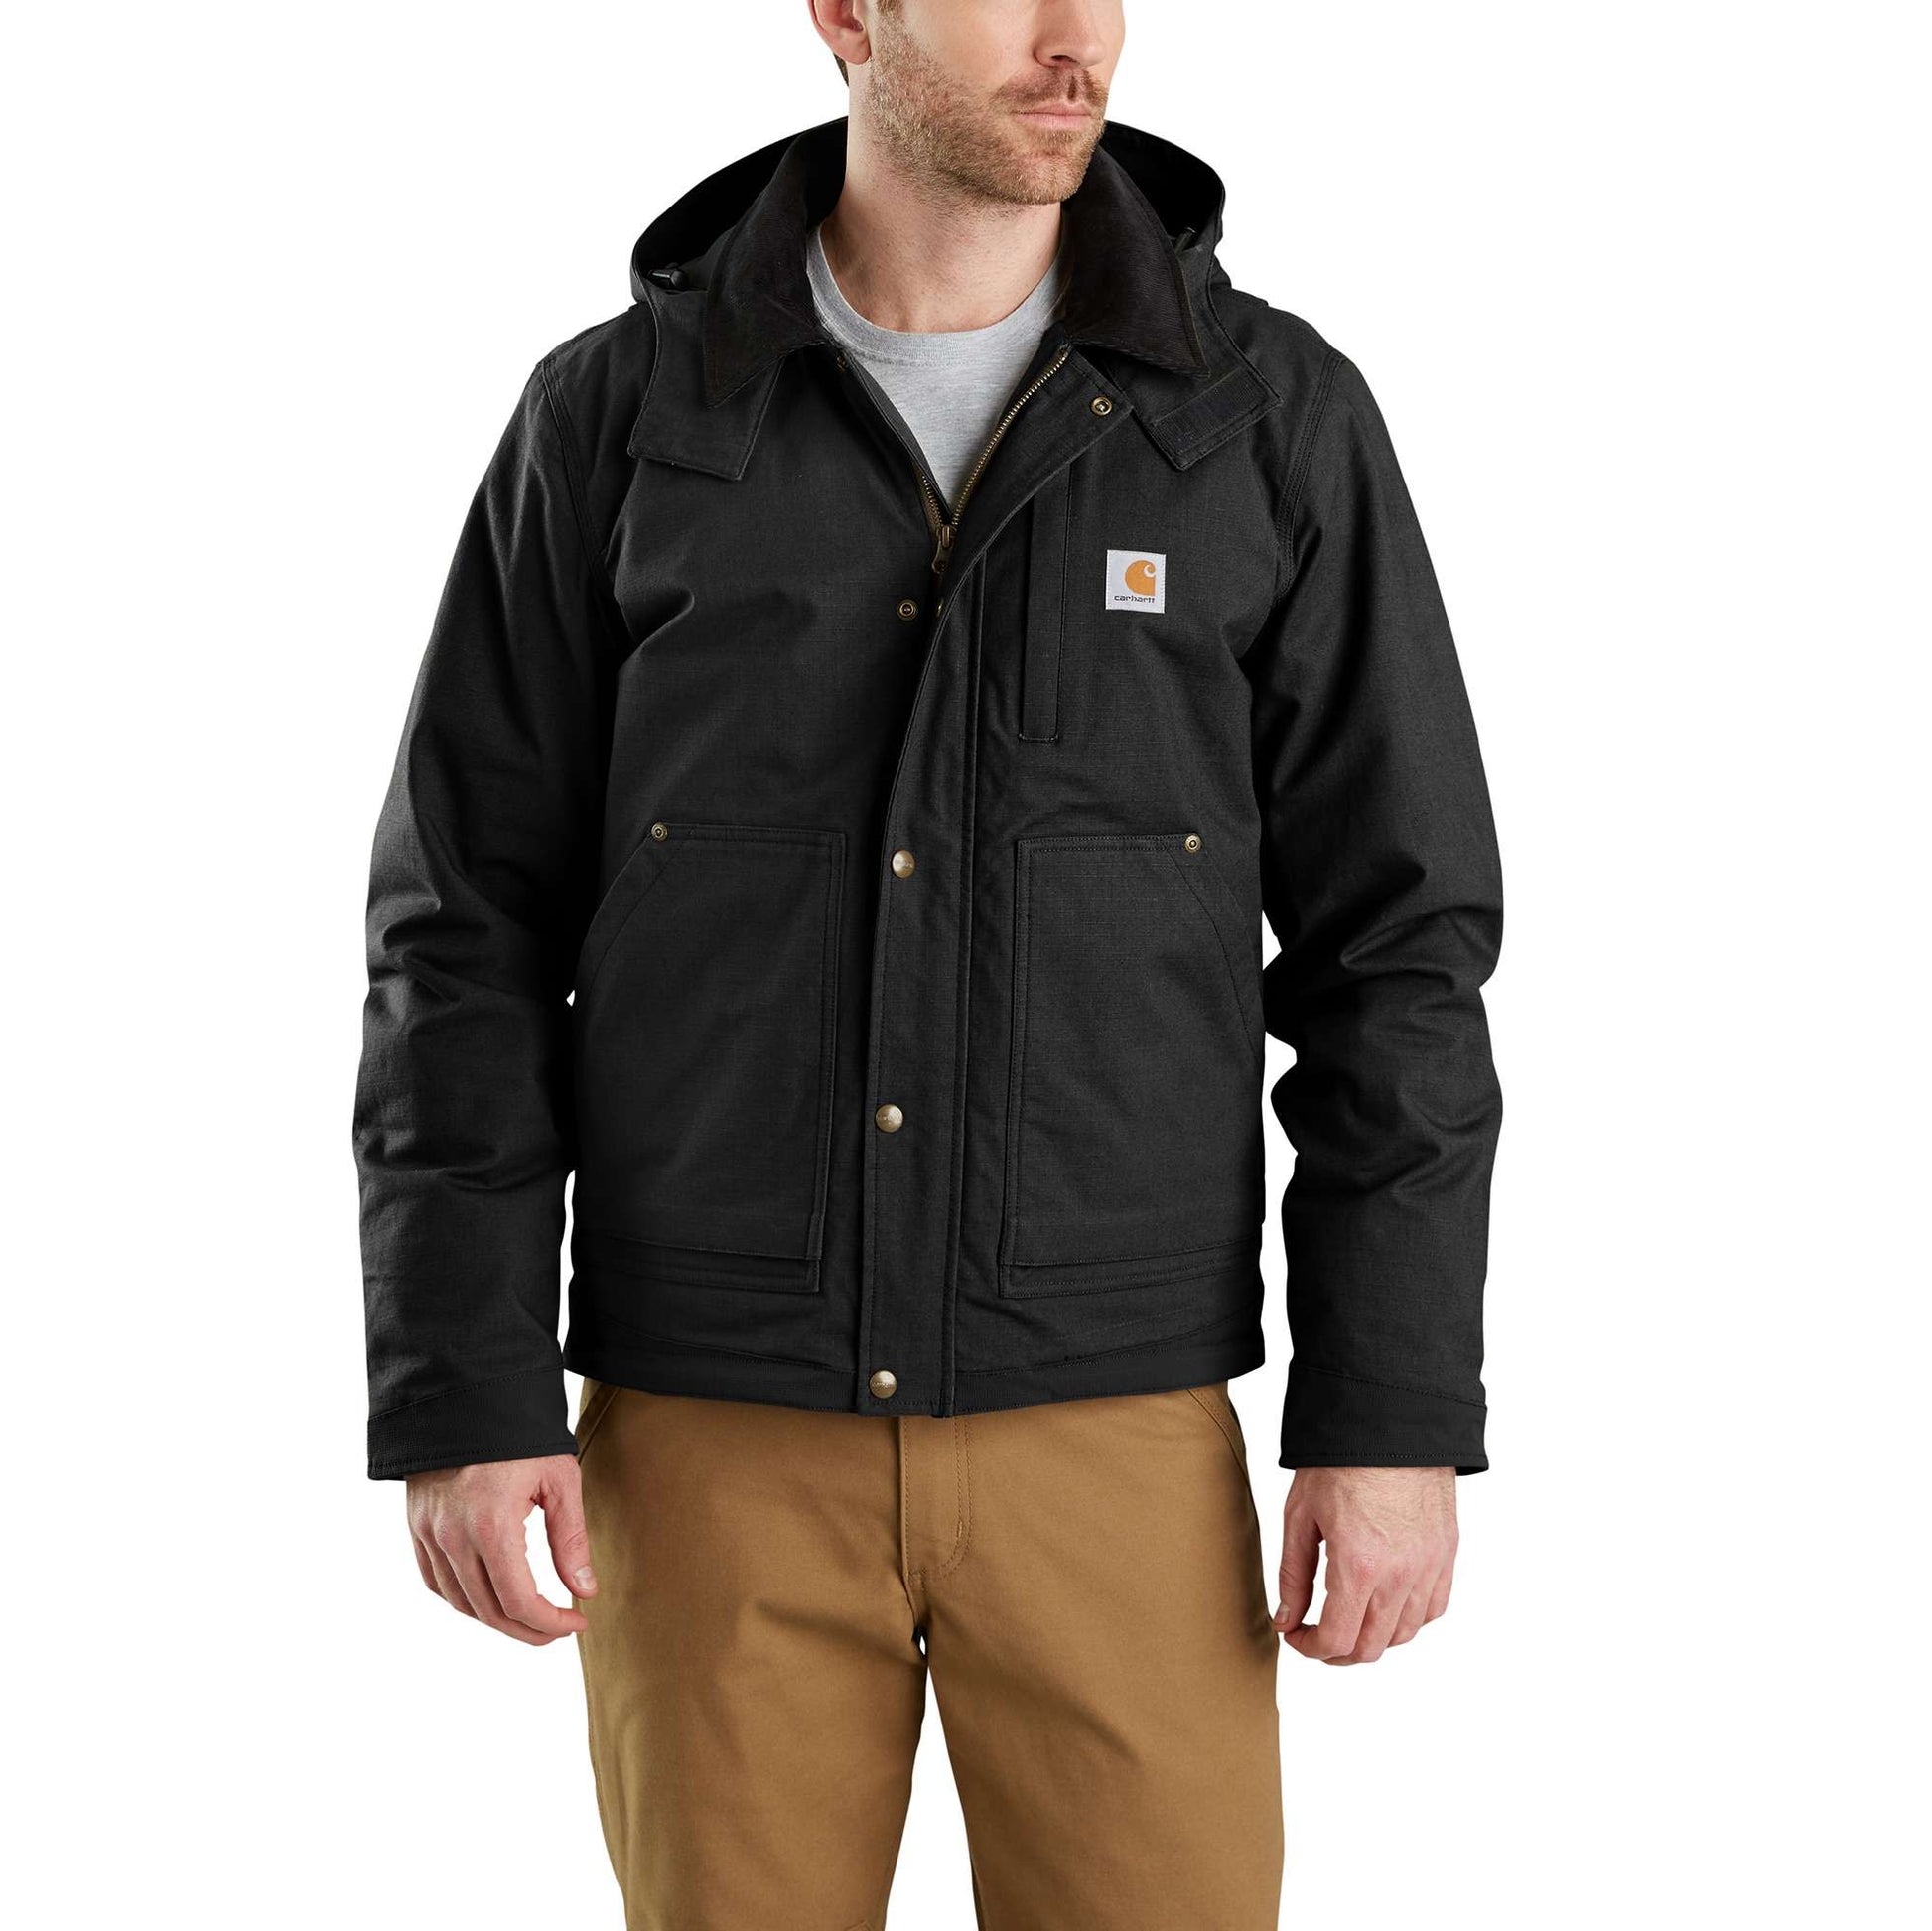 Full Swing® Relaxed Fit Ripstop Insulated Jacket - 3 Warmest